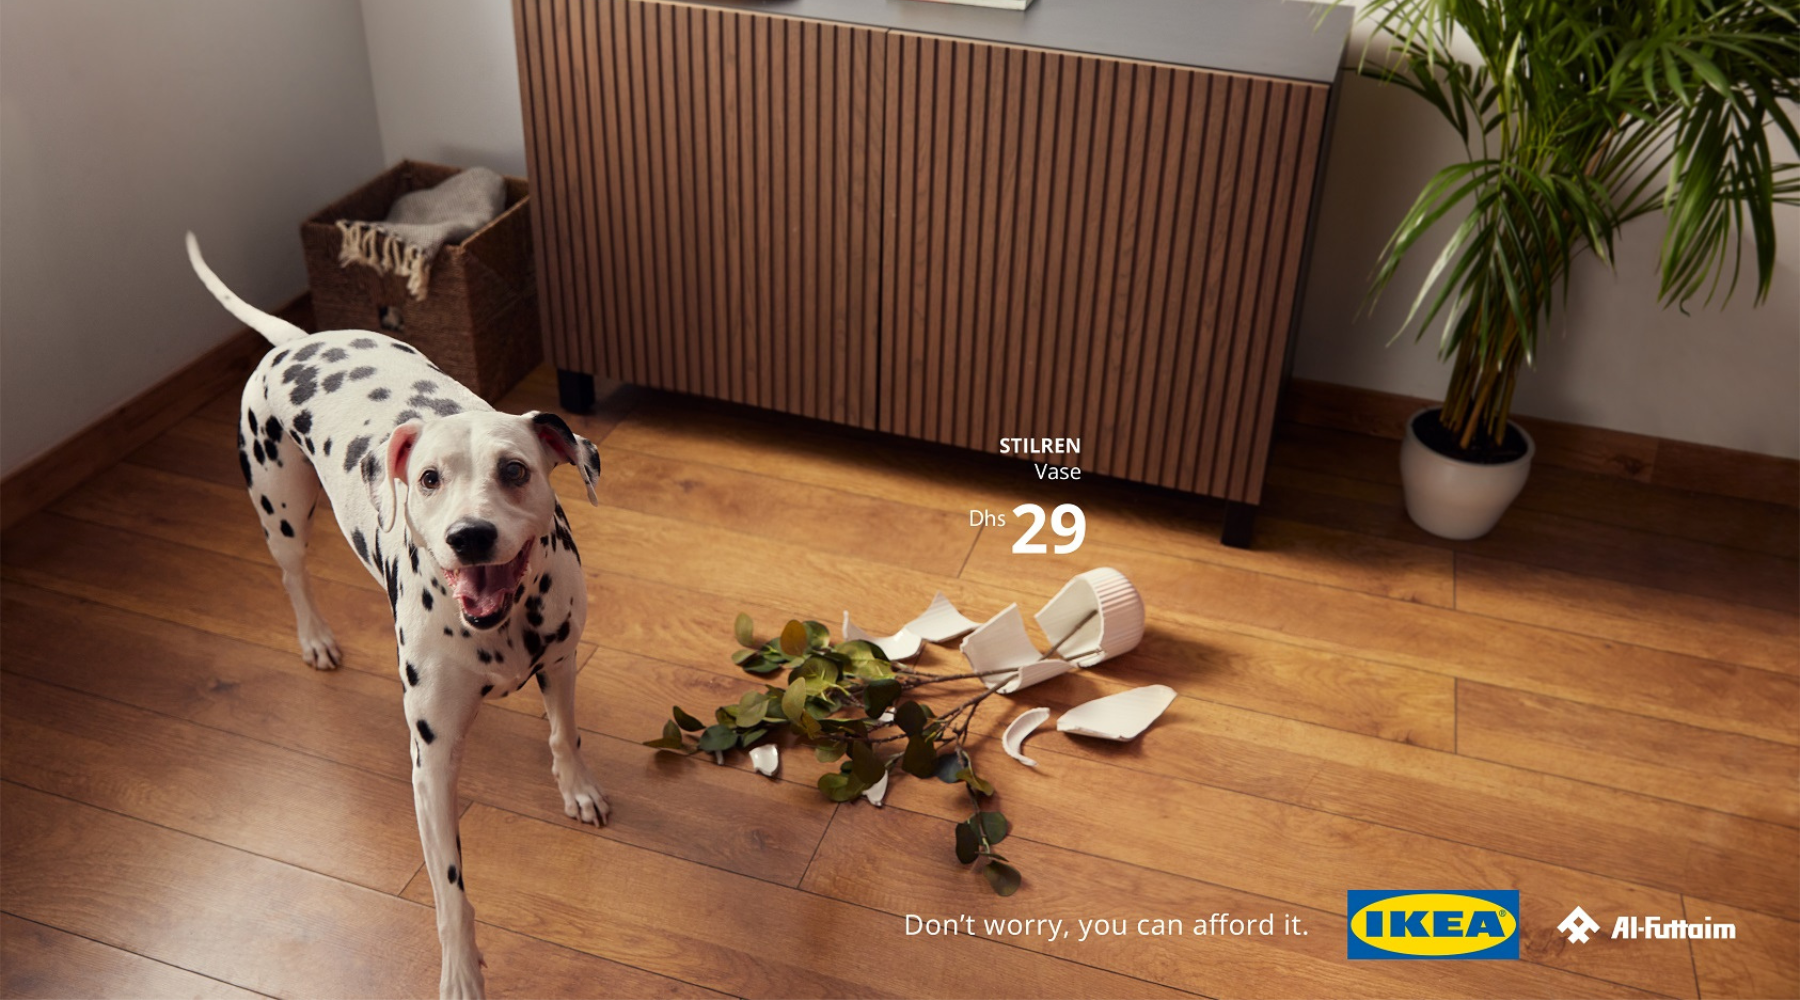 Ikea Portrays its Products Accidentally Broken by Pets to Highlight Affordability